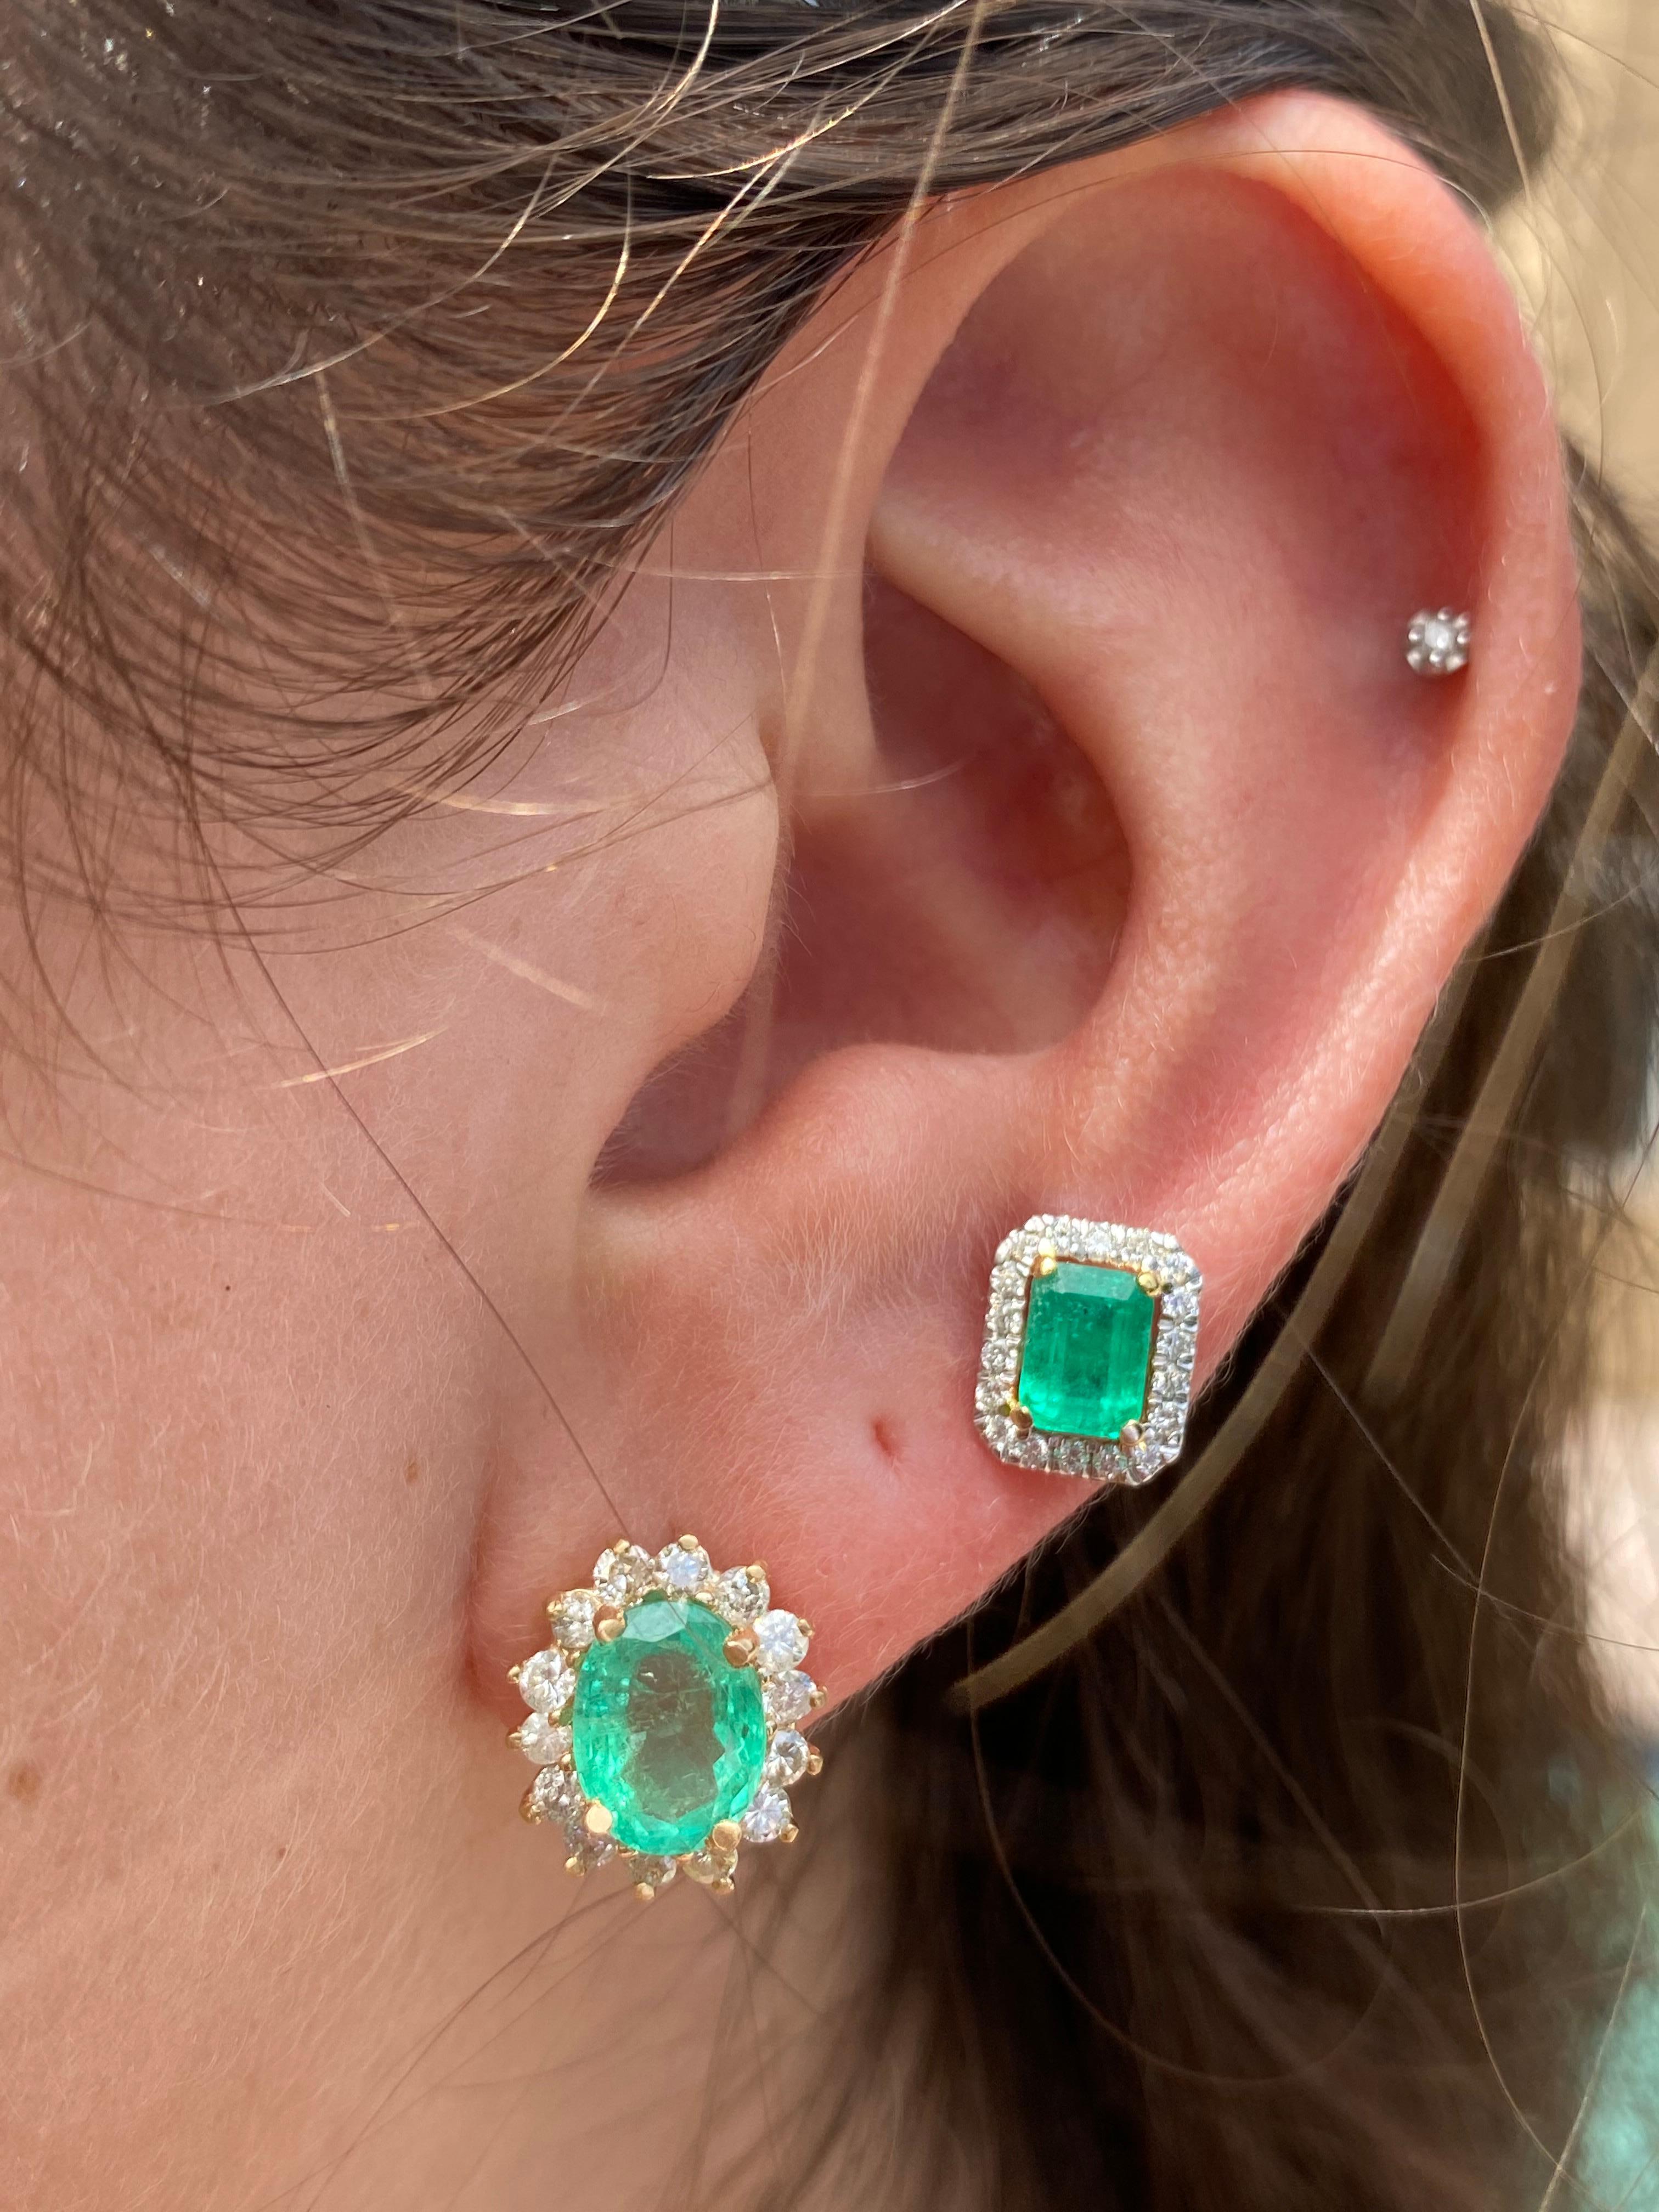 Centering Emerald-Cut Colombian Emeralds totaling 1.15 Carats, framed by an additional 36 Round-Brilliant Cut Diamonds totaling 0.22 Carats, and set in 18K White Gold. 

Gorgeous natural Colombian Emeralds set in 18k solid white gold plated.